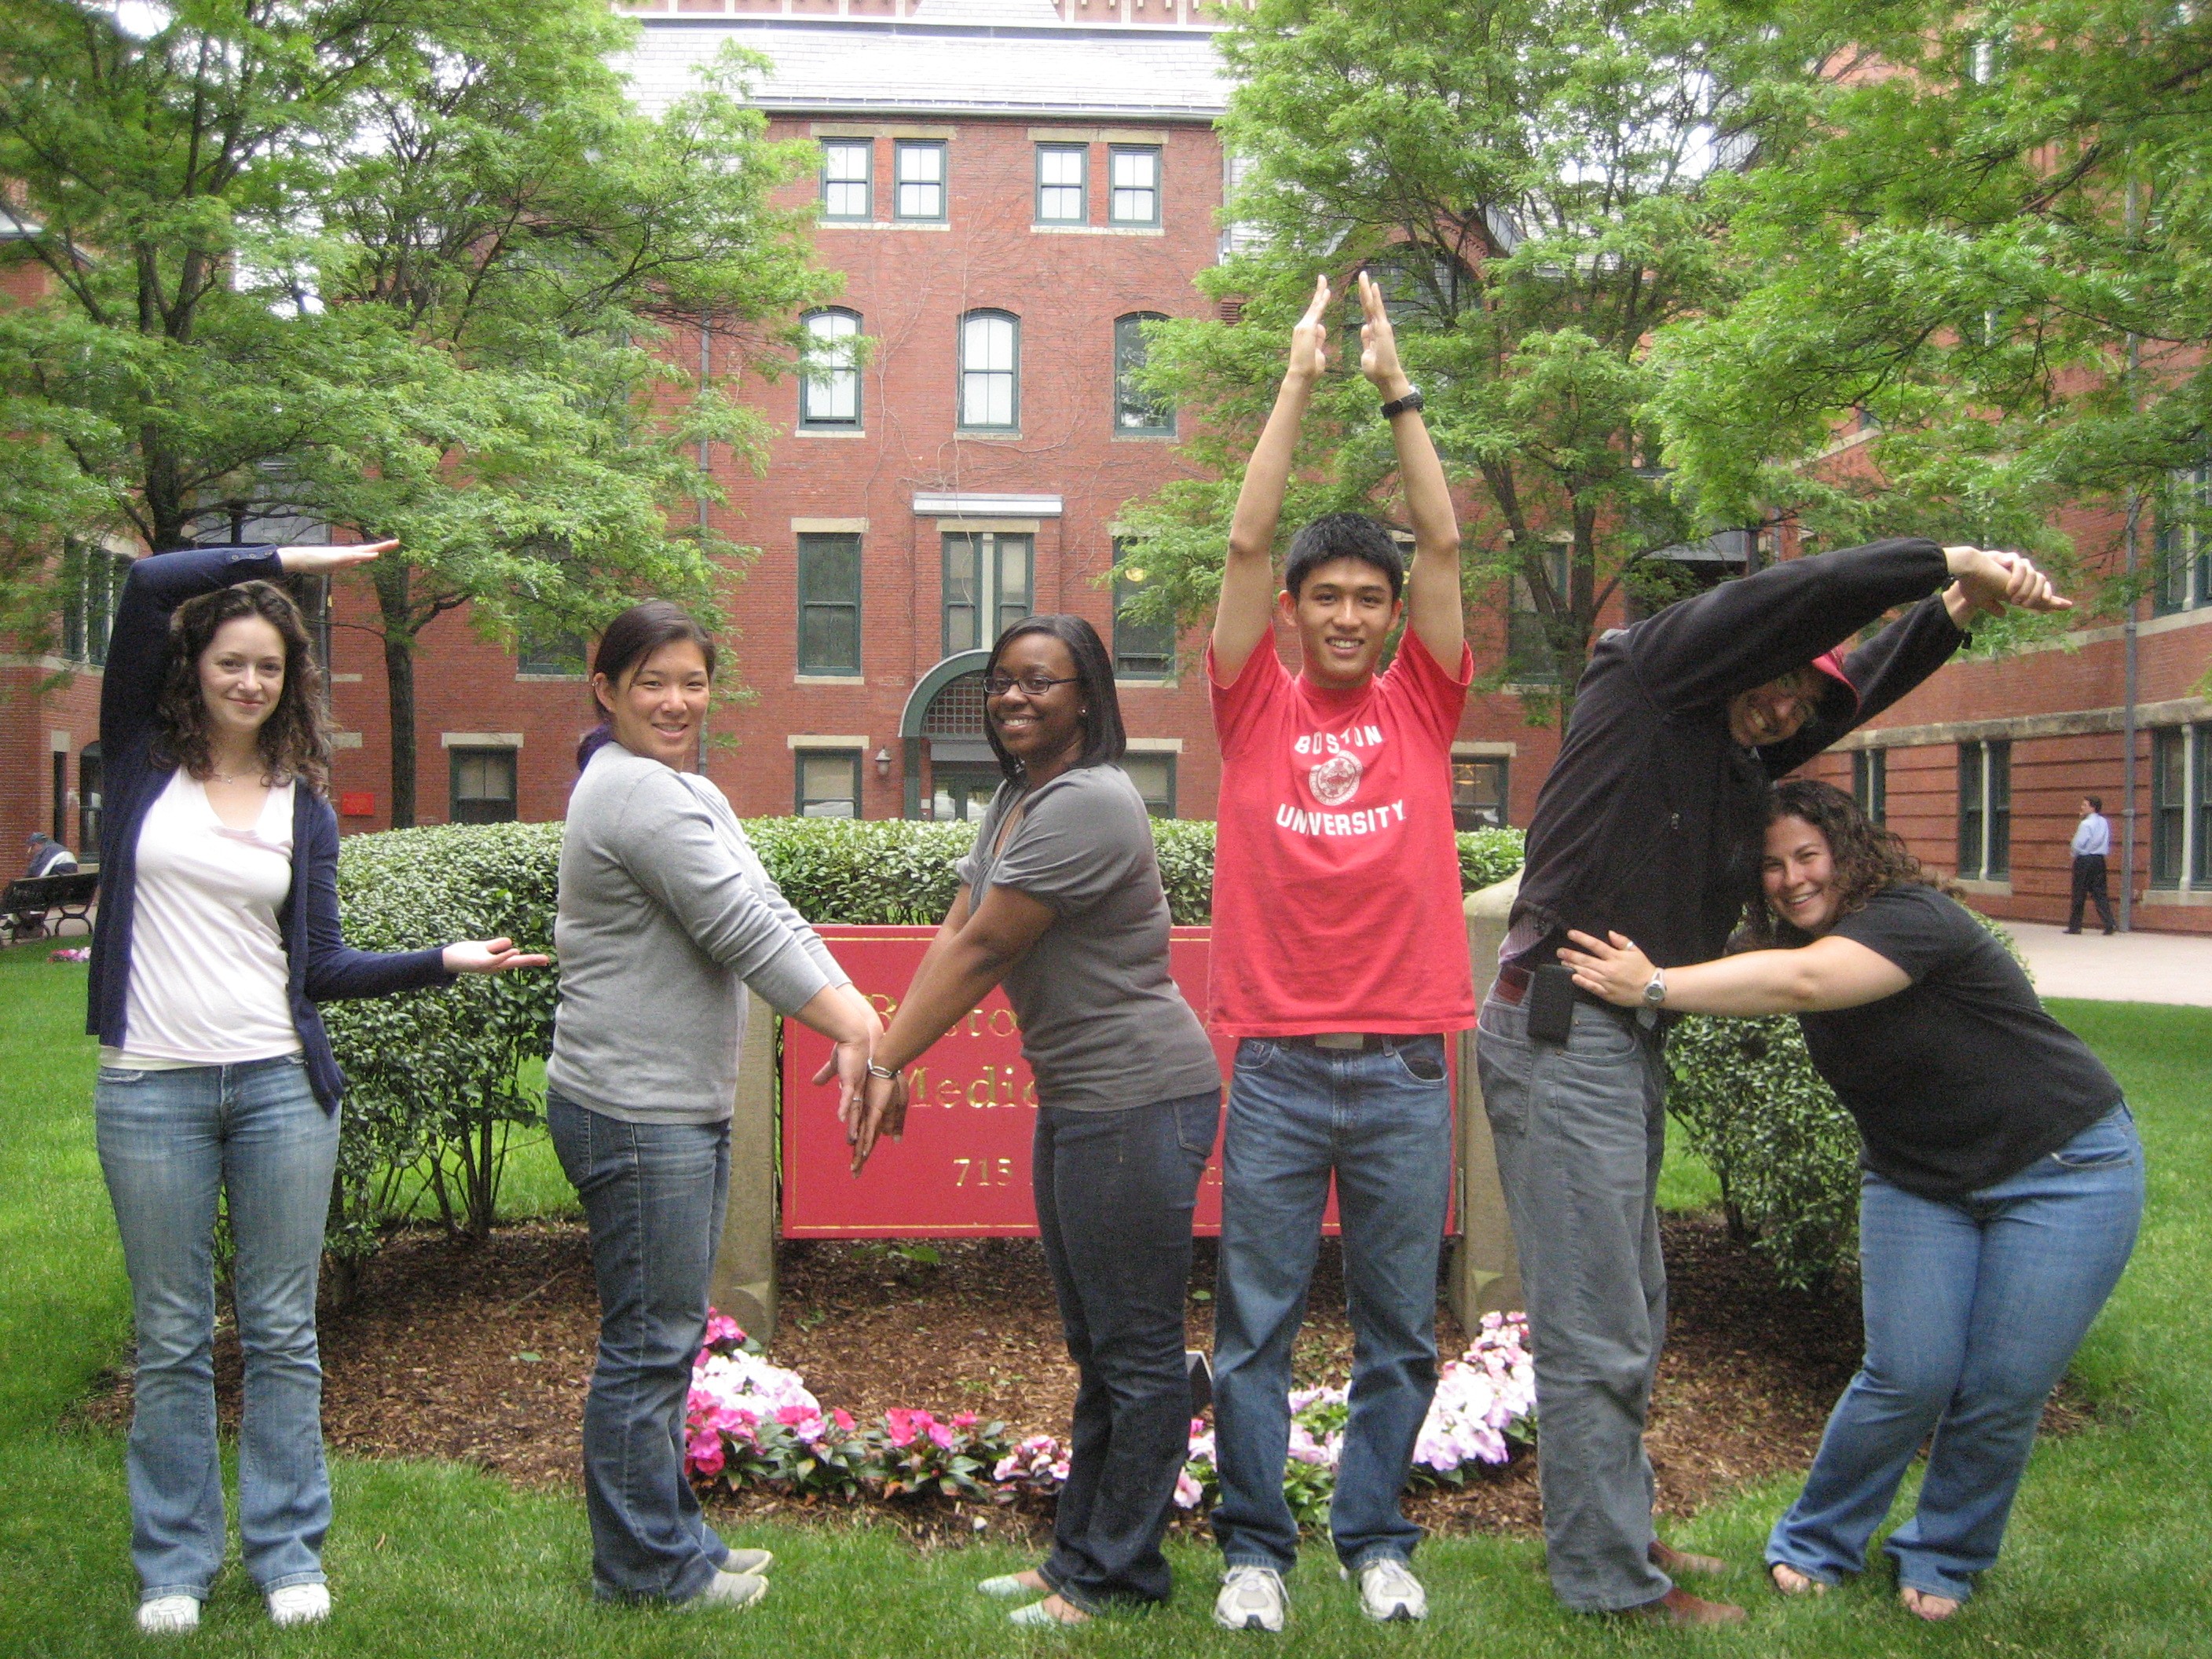 Members of the Boston FMIG spelling out / Members of the Boston FMIG spelling out